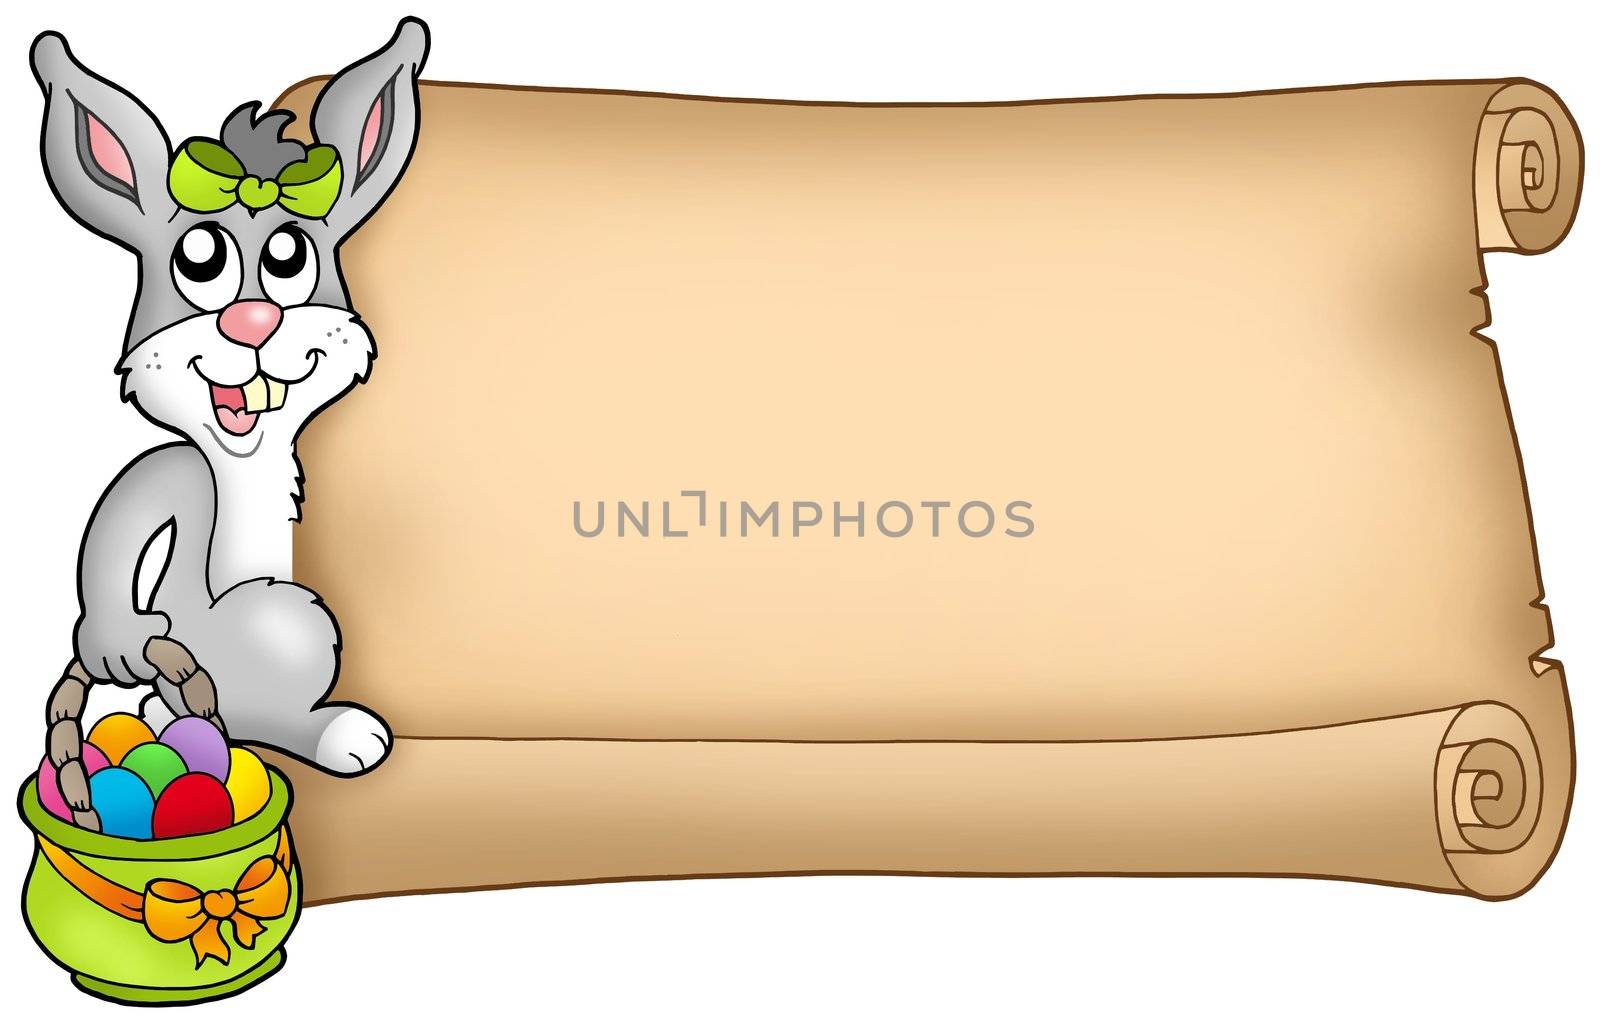 Easter scroll with cute bunny - color illustration.